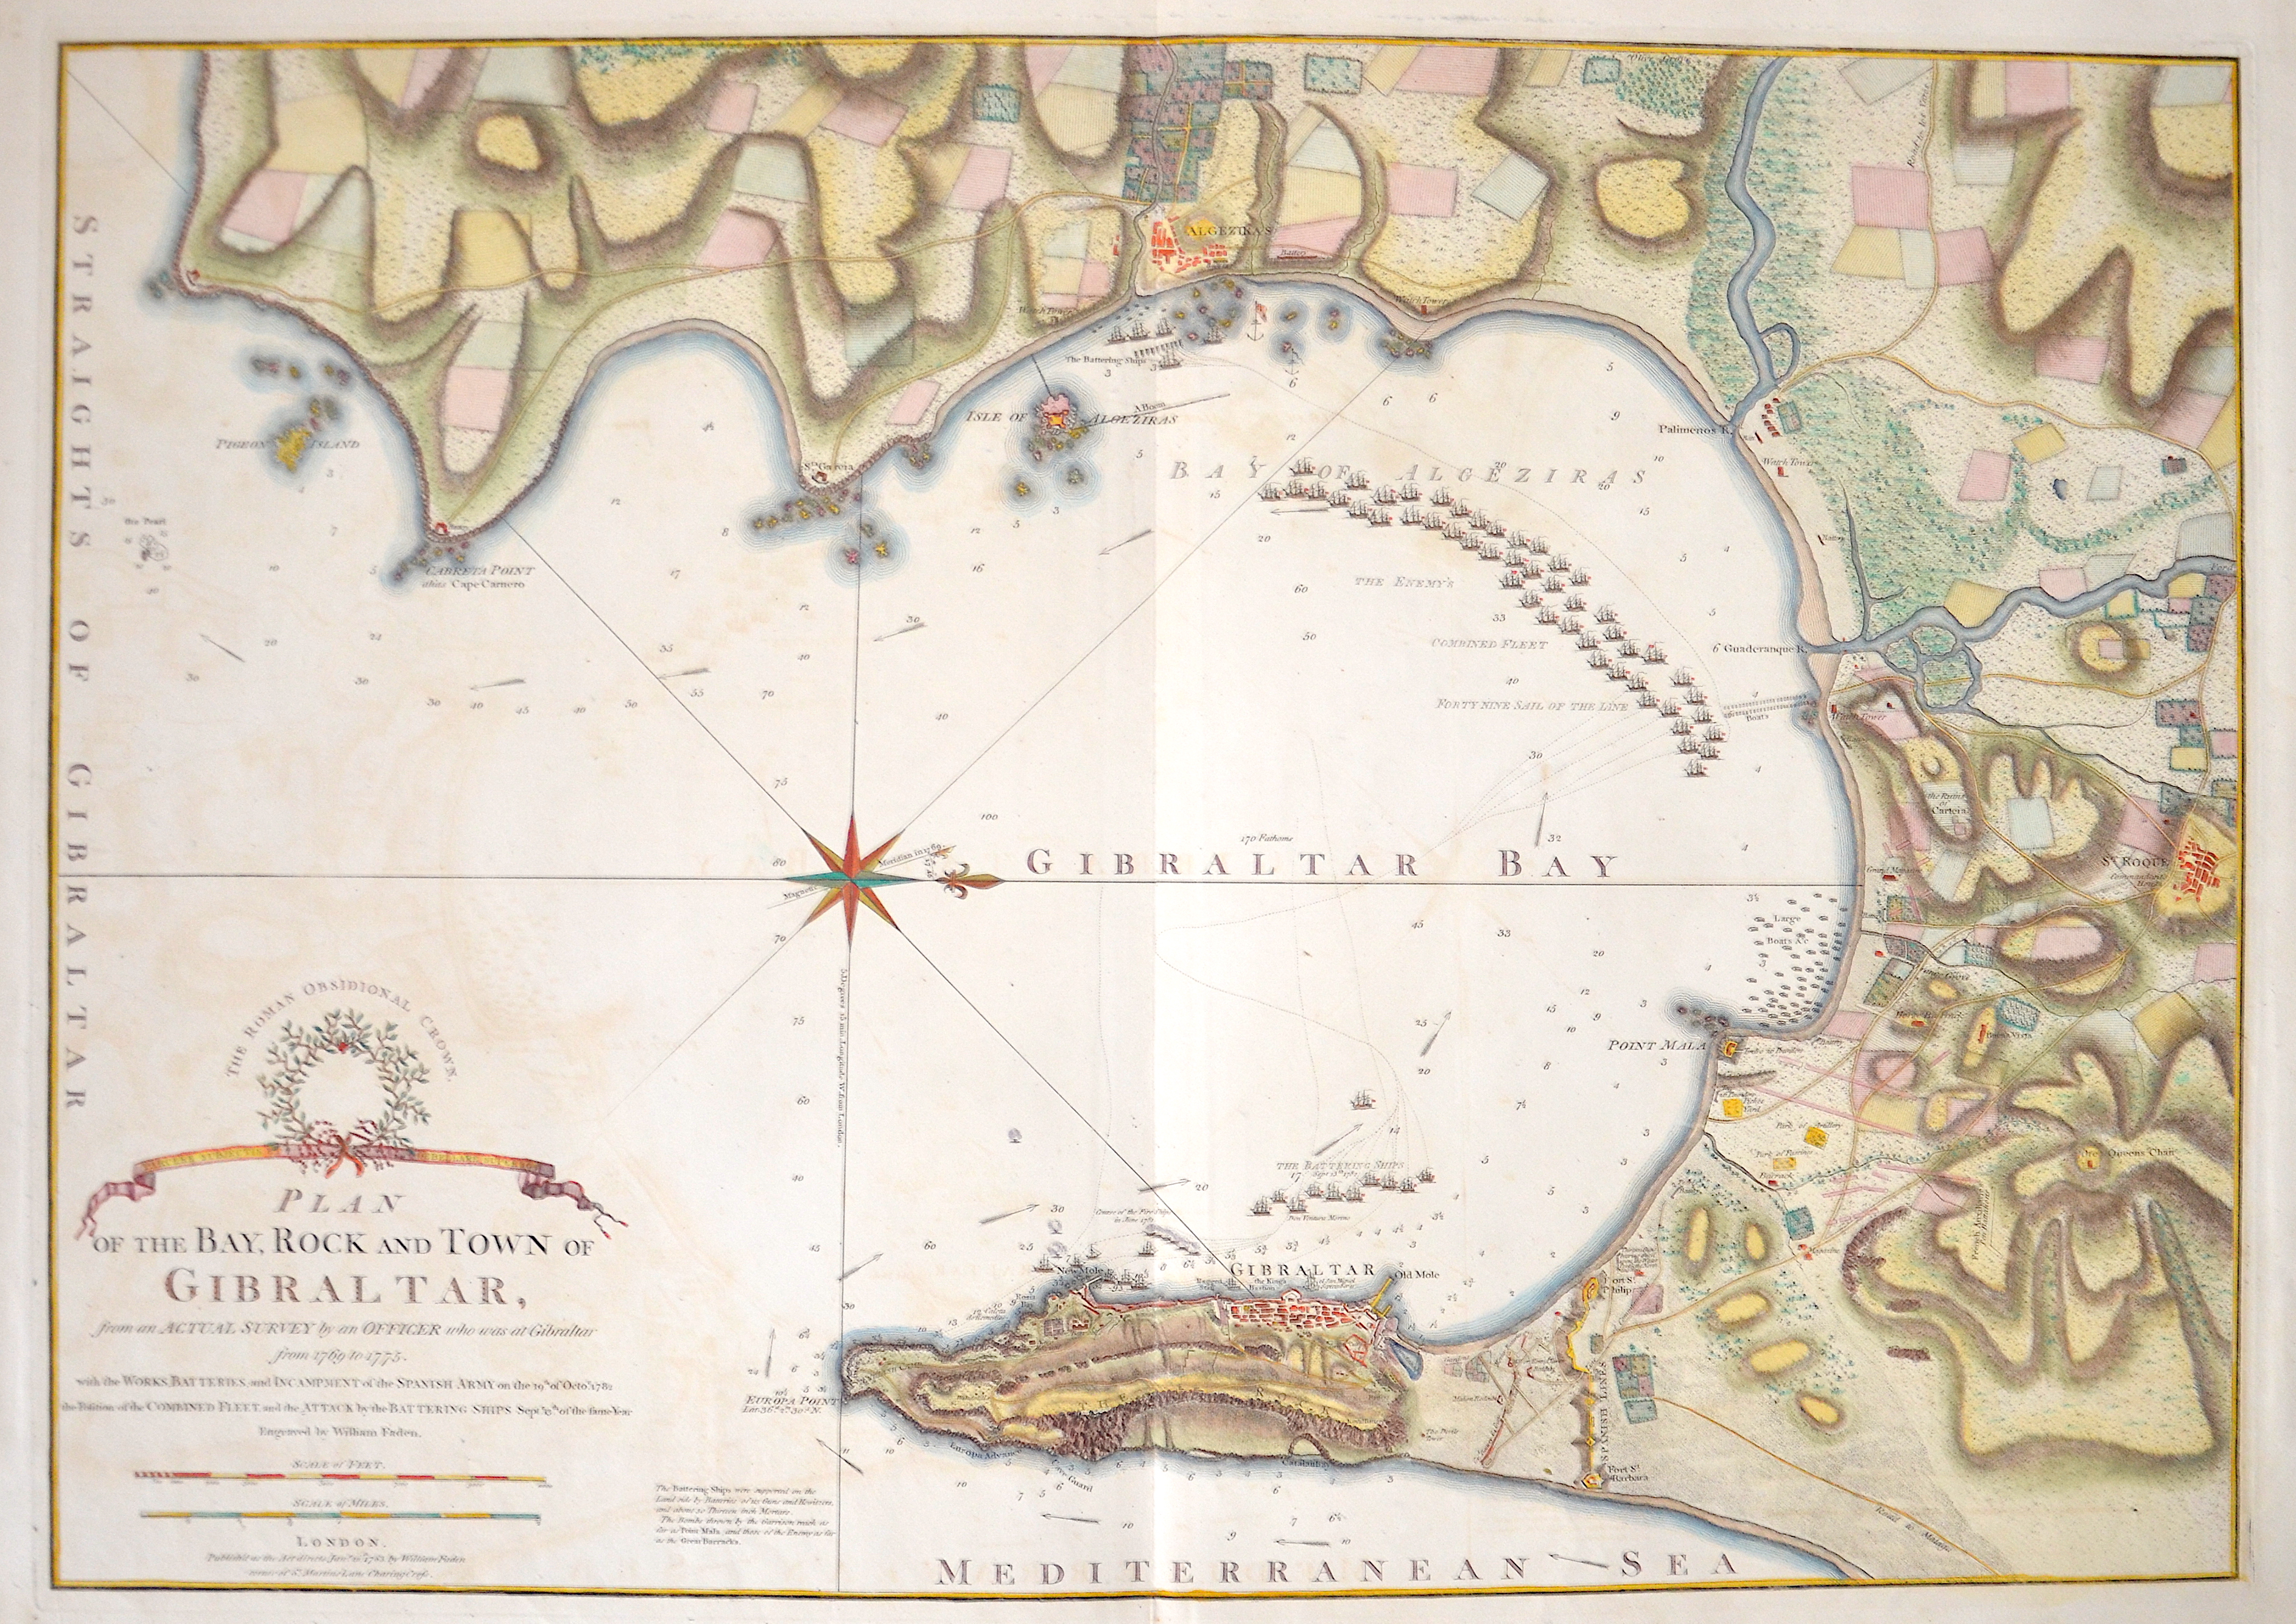 Faden William Plan of the Bay, Rock and Town of Gibraltar, from an Actual Survey by an Officer who was at Gibraltar from 1769 to 1775.